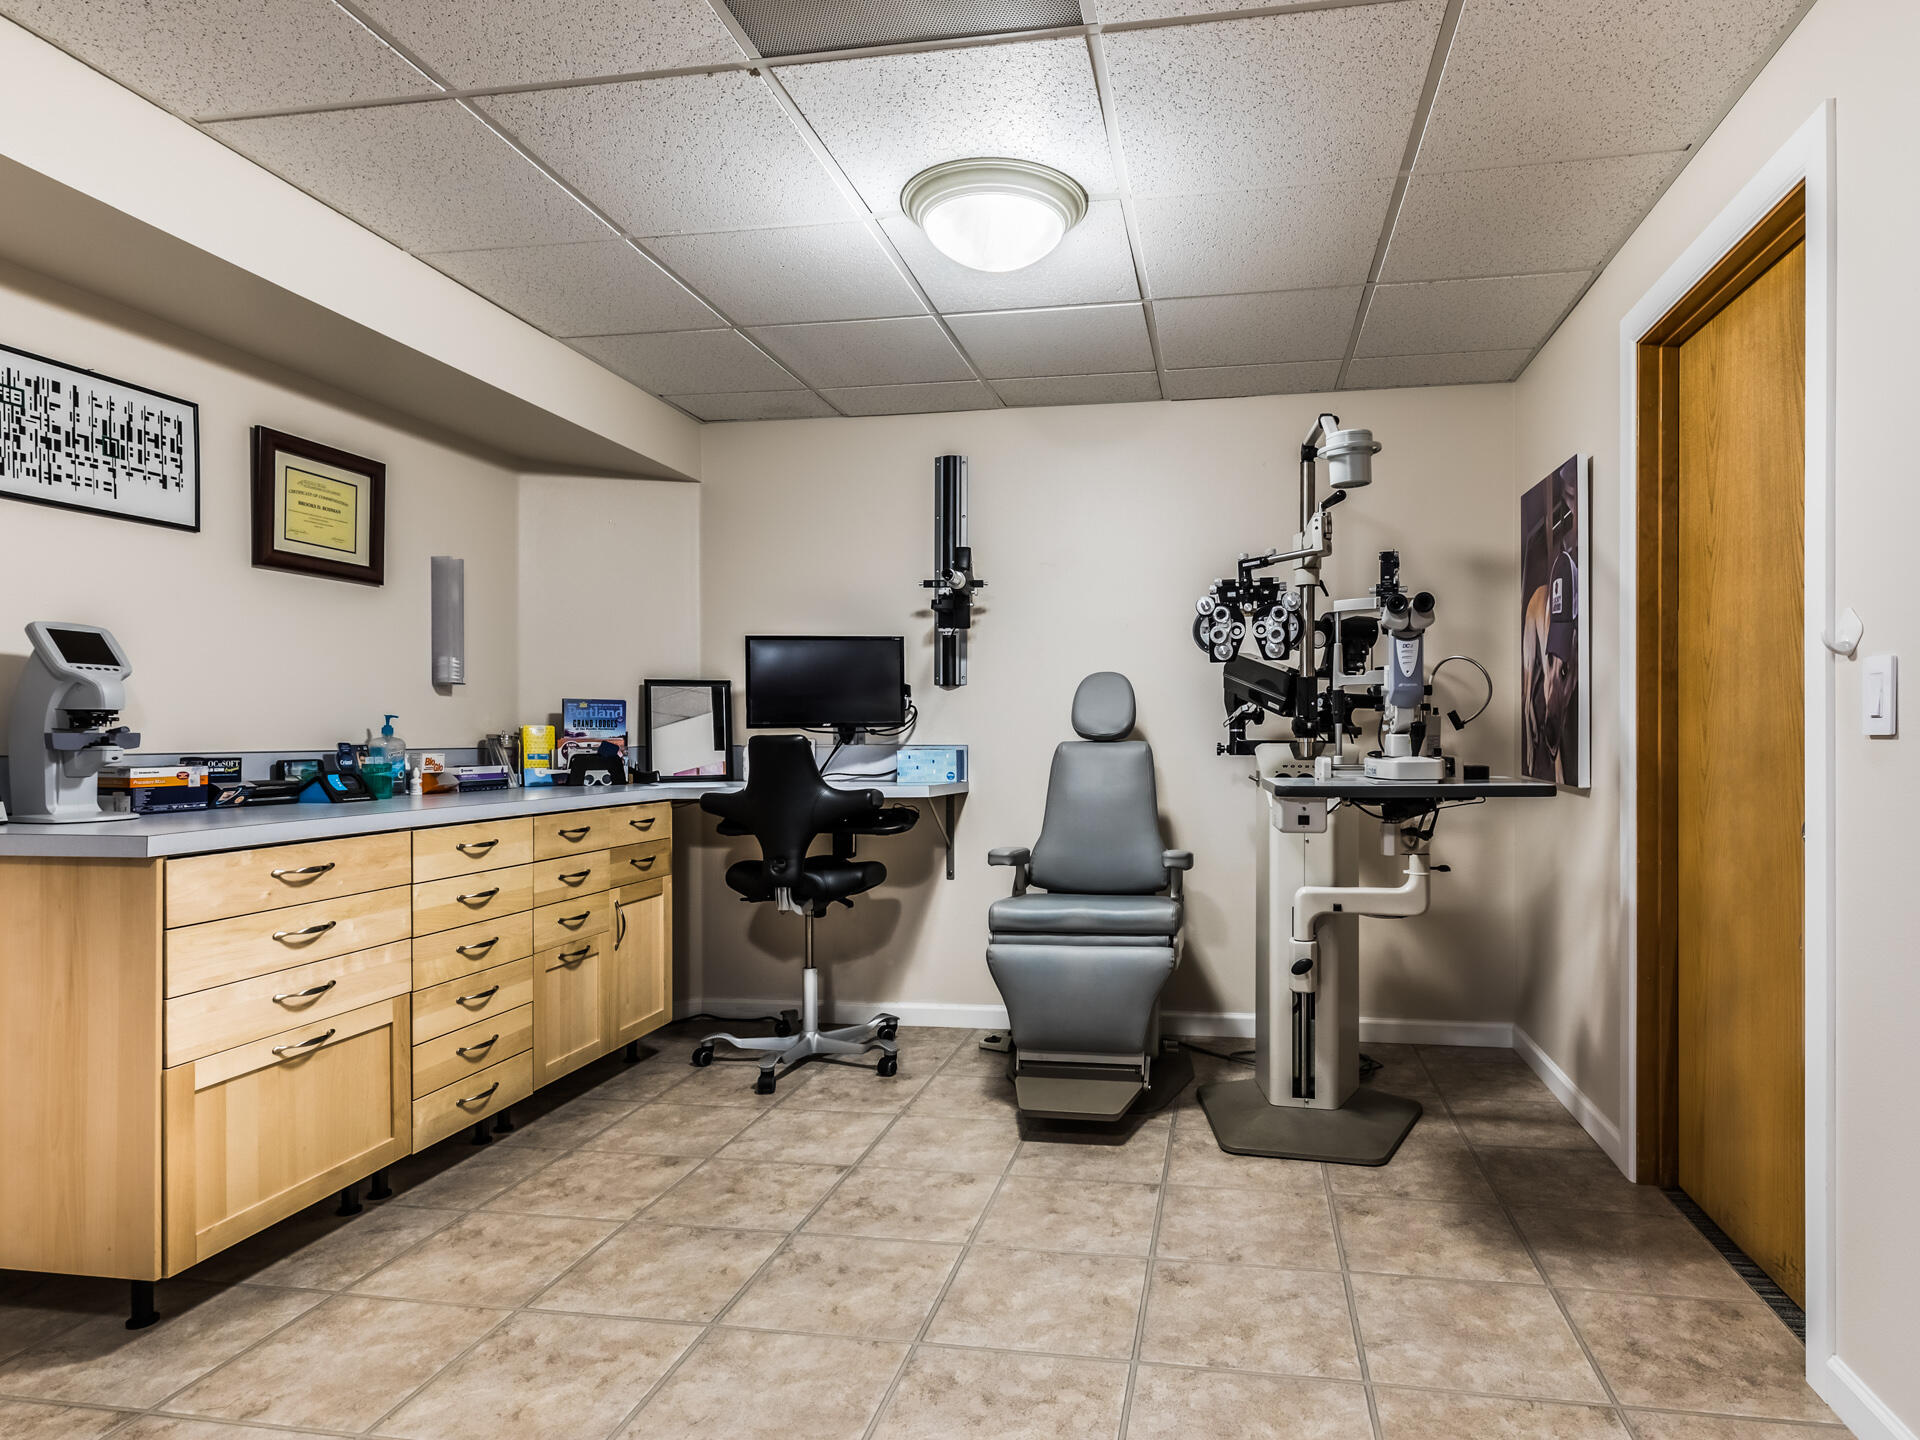 St. Helens Eyecare Specialists 2020 Columbia Blvd, St Helens Oregon 97051